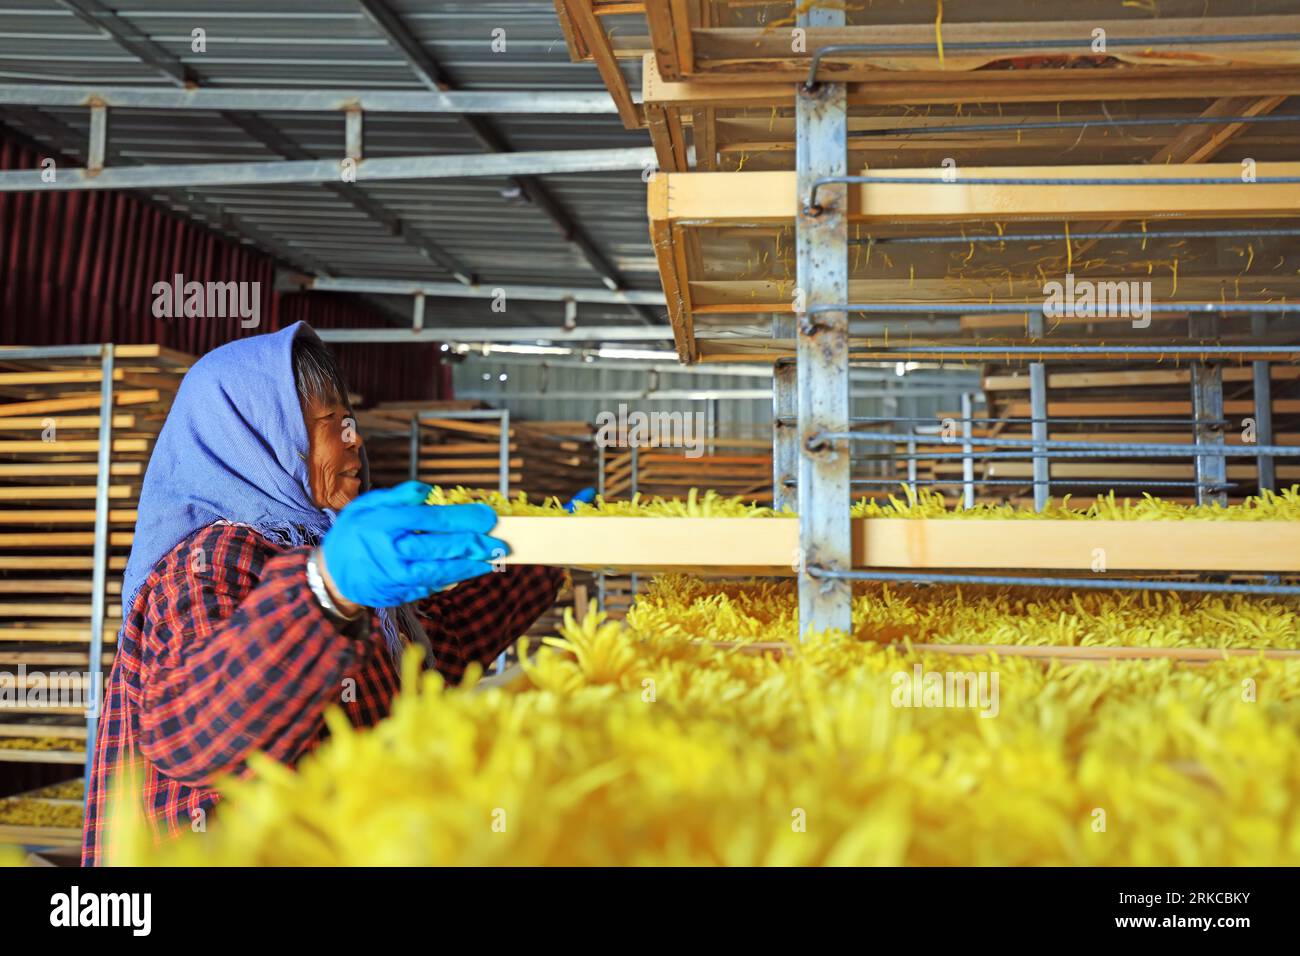 LUANNAN COUNTY, China - November 21, 2018: Farmers check the quality of chrysanthemum chrysanthemi, LUANNAN COUNTY, Hebei Province, China Stock Photo